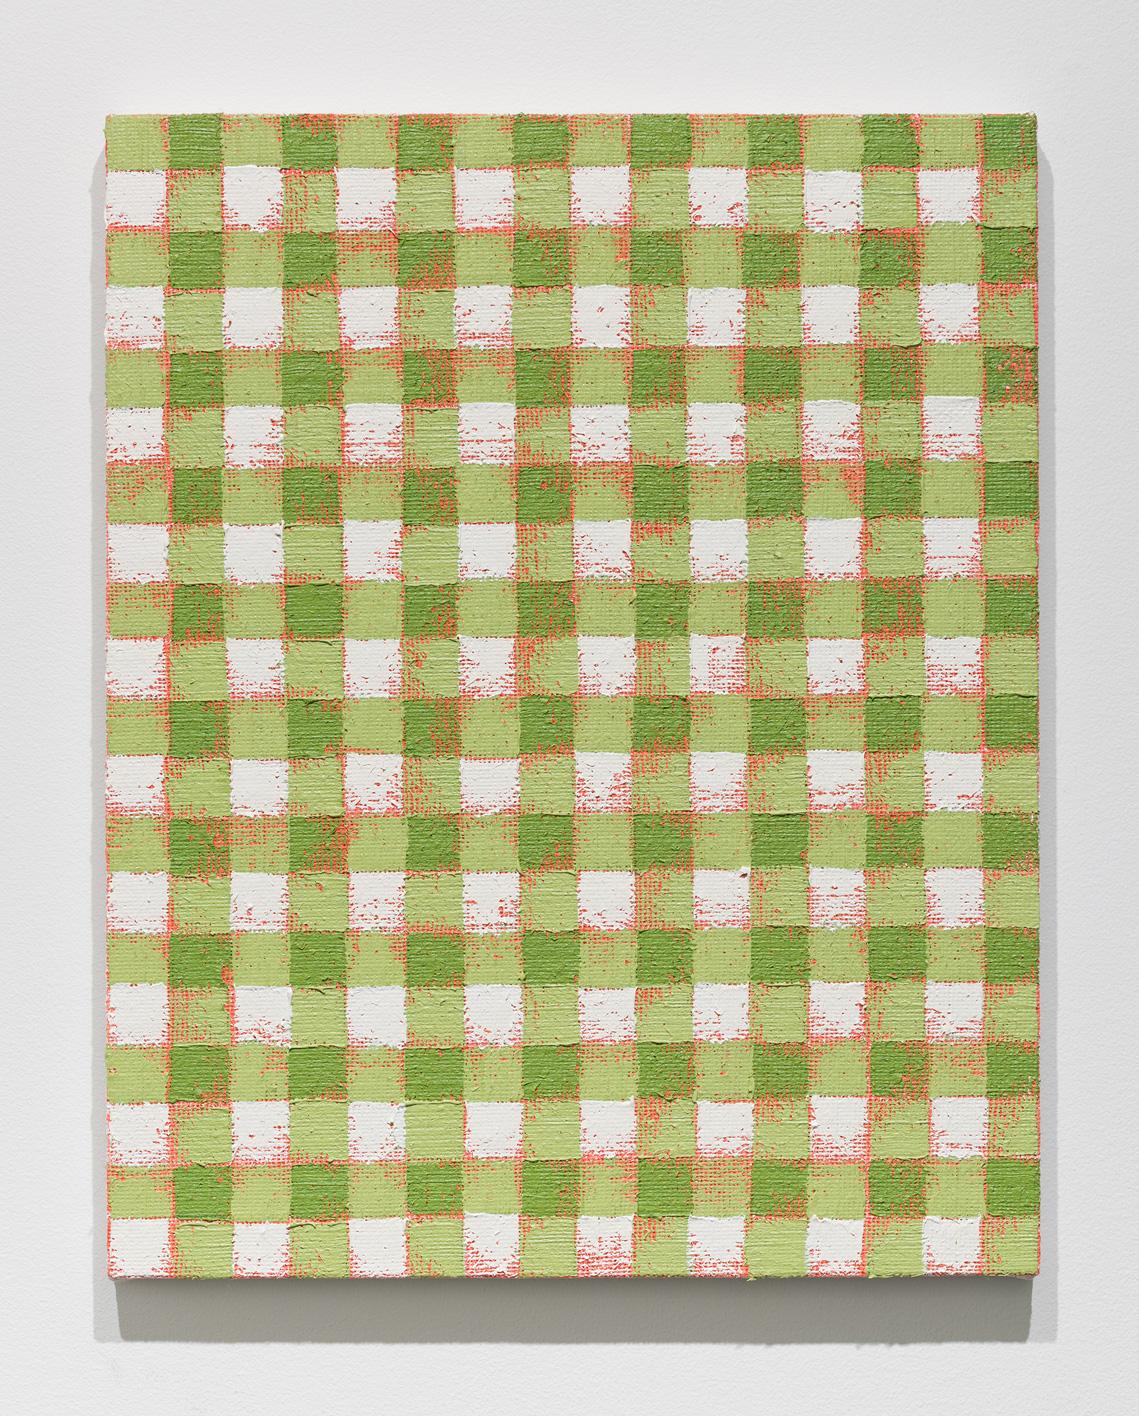 Michelle Grabner, Untitled, 2017, oil paint on burlap on cradled panel, 20 x 16 x 1 inches.

Michelle Grabner (b. 1962 in Oshkosh, Wisconsin) works in variety of mediums including drawing, painting, video and sculpture. Grabner’s multi-faceted